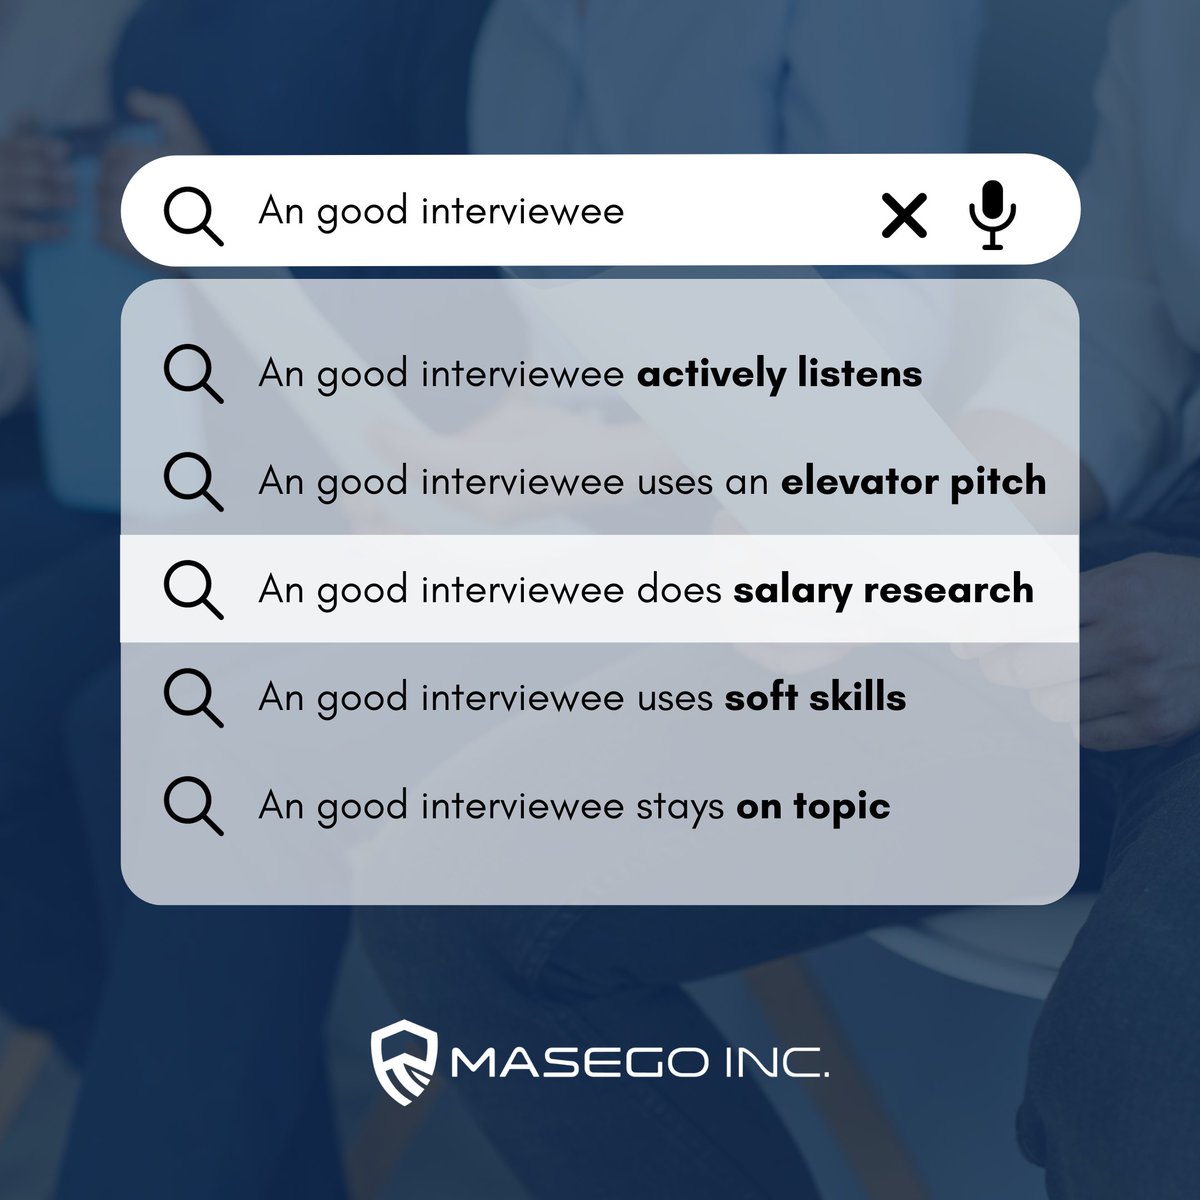 #Interviewtip: A good interviewee researches salary options before an interview. It's beneficial to share your desired salary range and know what the company offers. Recruiters can find the right opportunities faster if applicants provide salary goals. 
#jobsforveterans #hiring